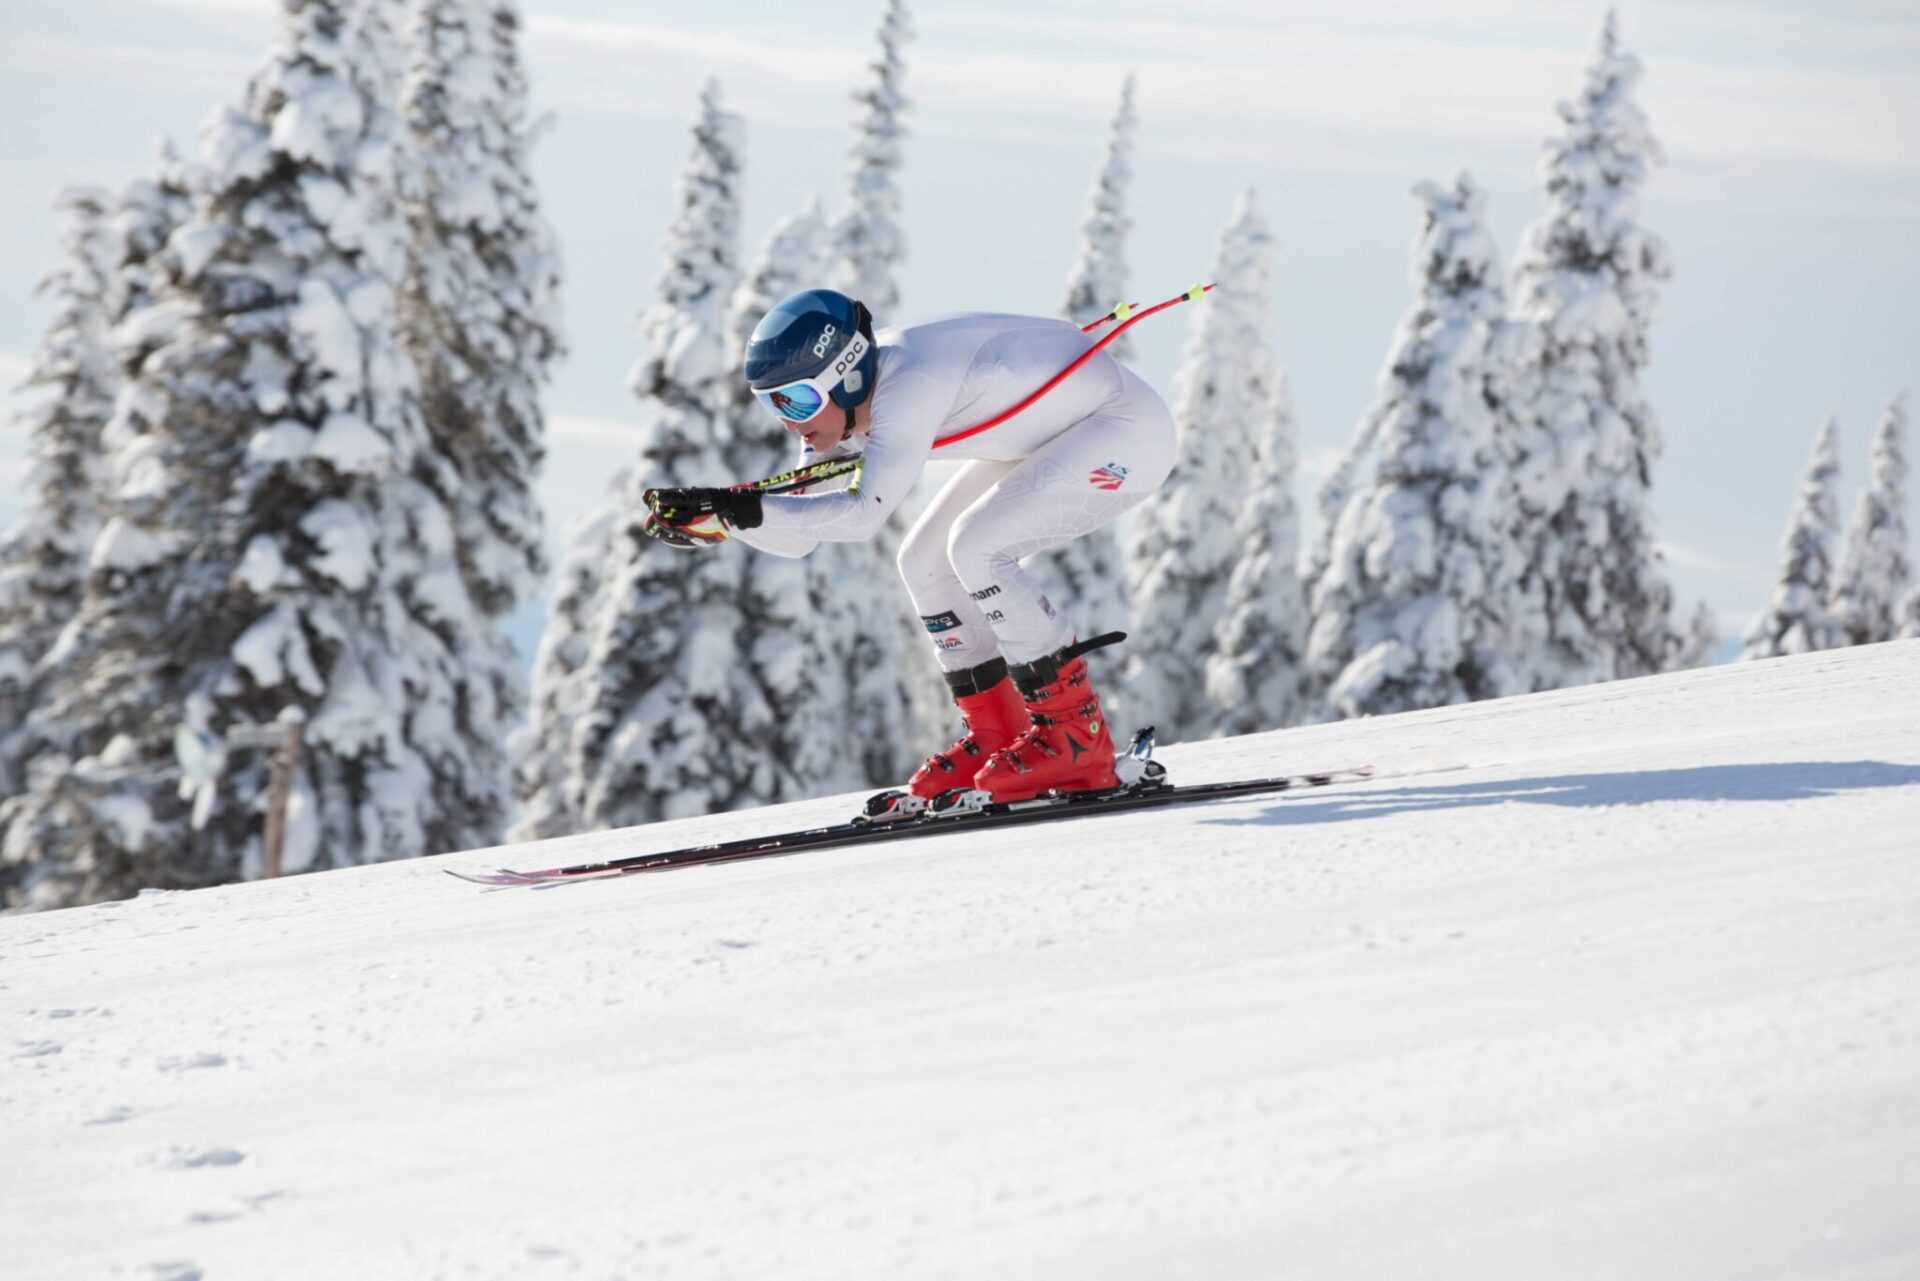 A person ski-racing with white gear and red boots.